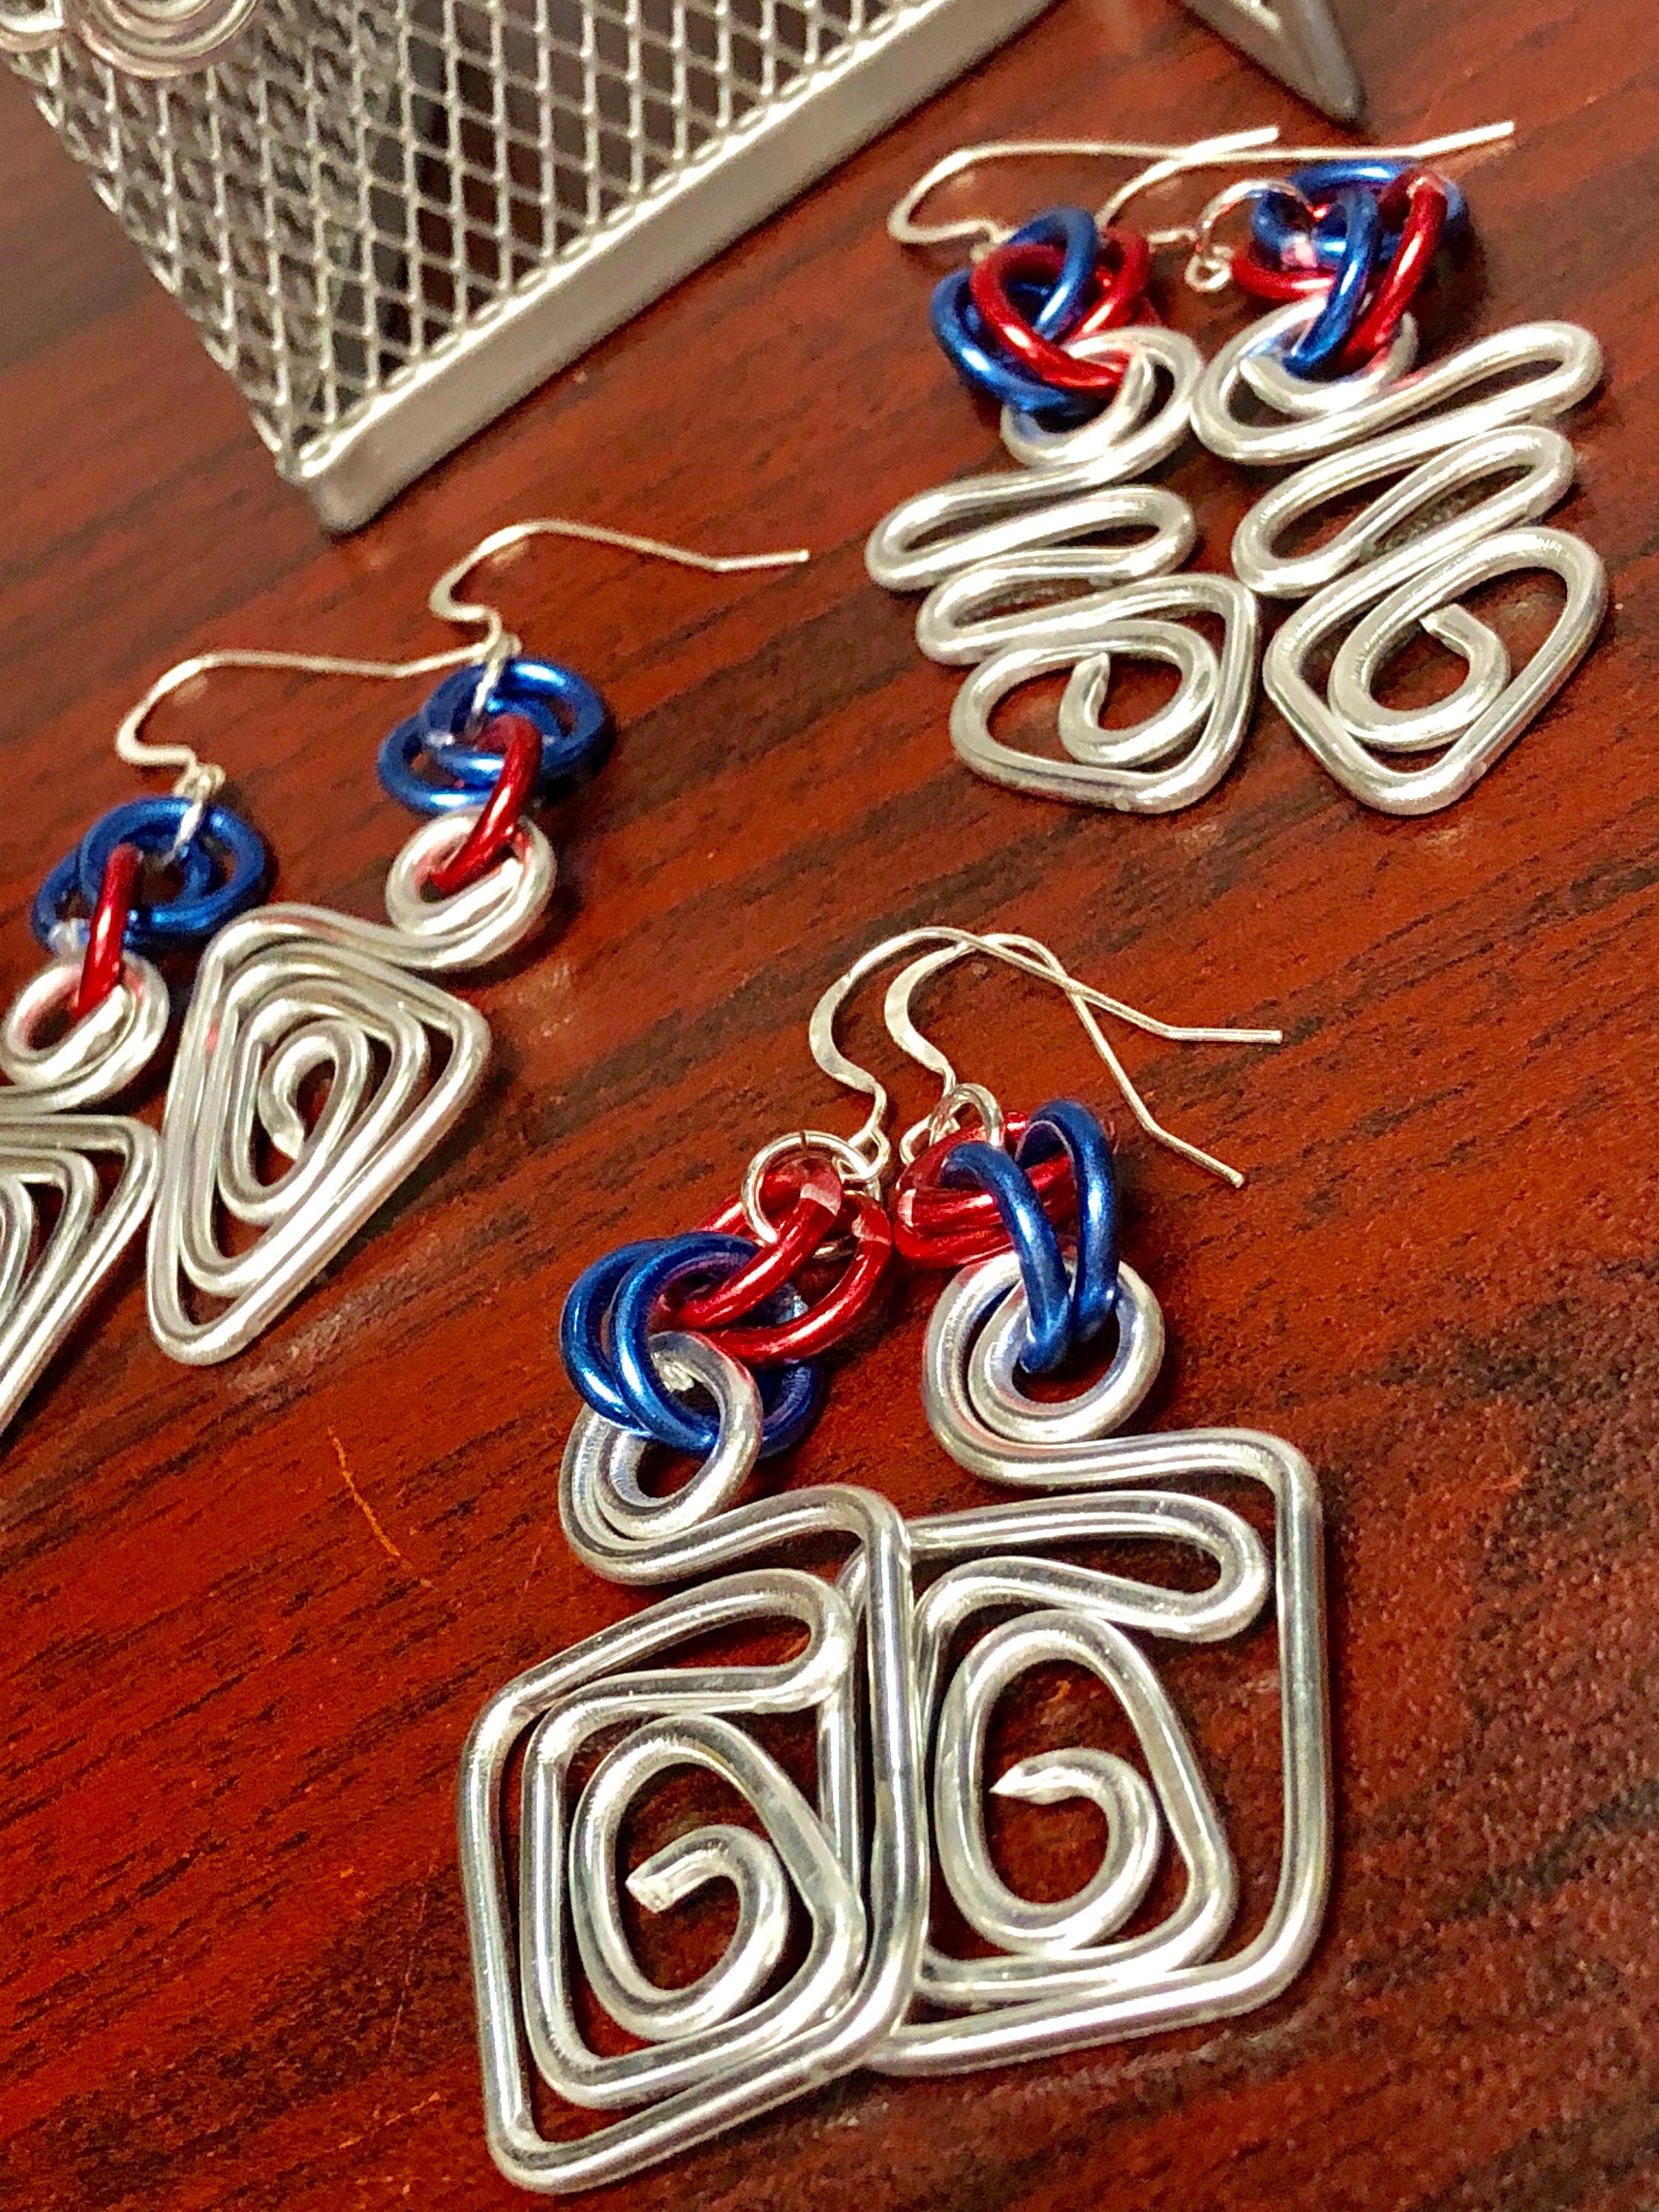 Small Square Silver Earrings with Red and Blue accents, Great for 4th of July